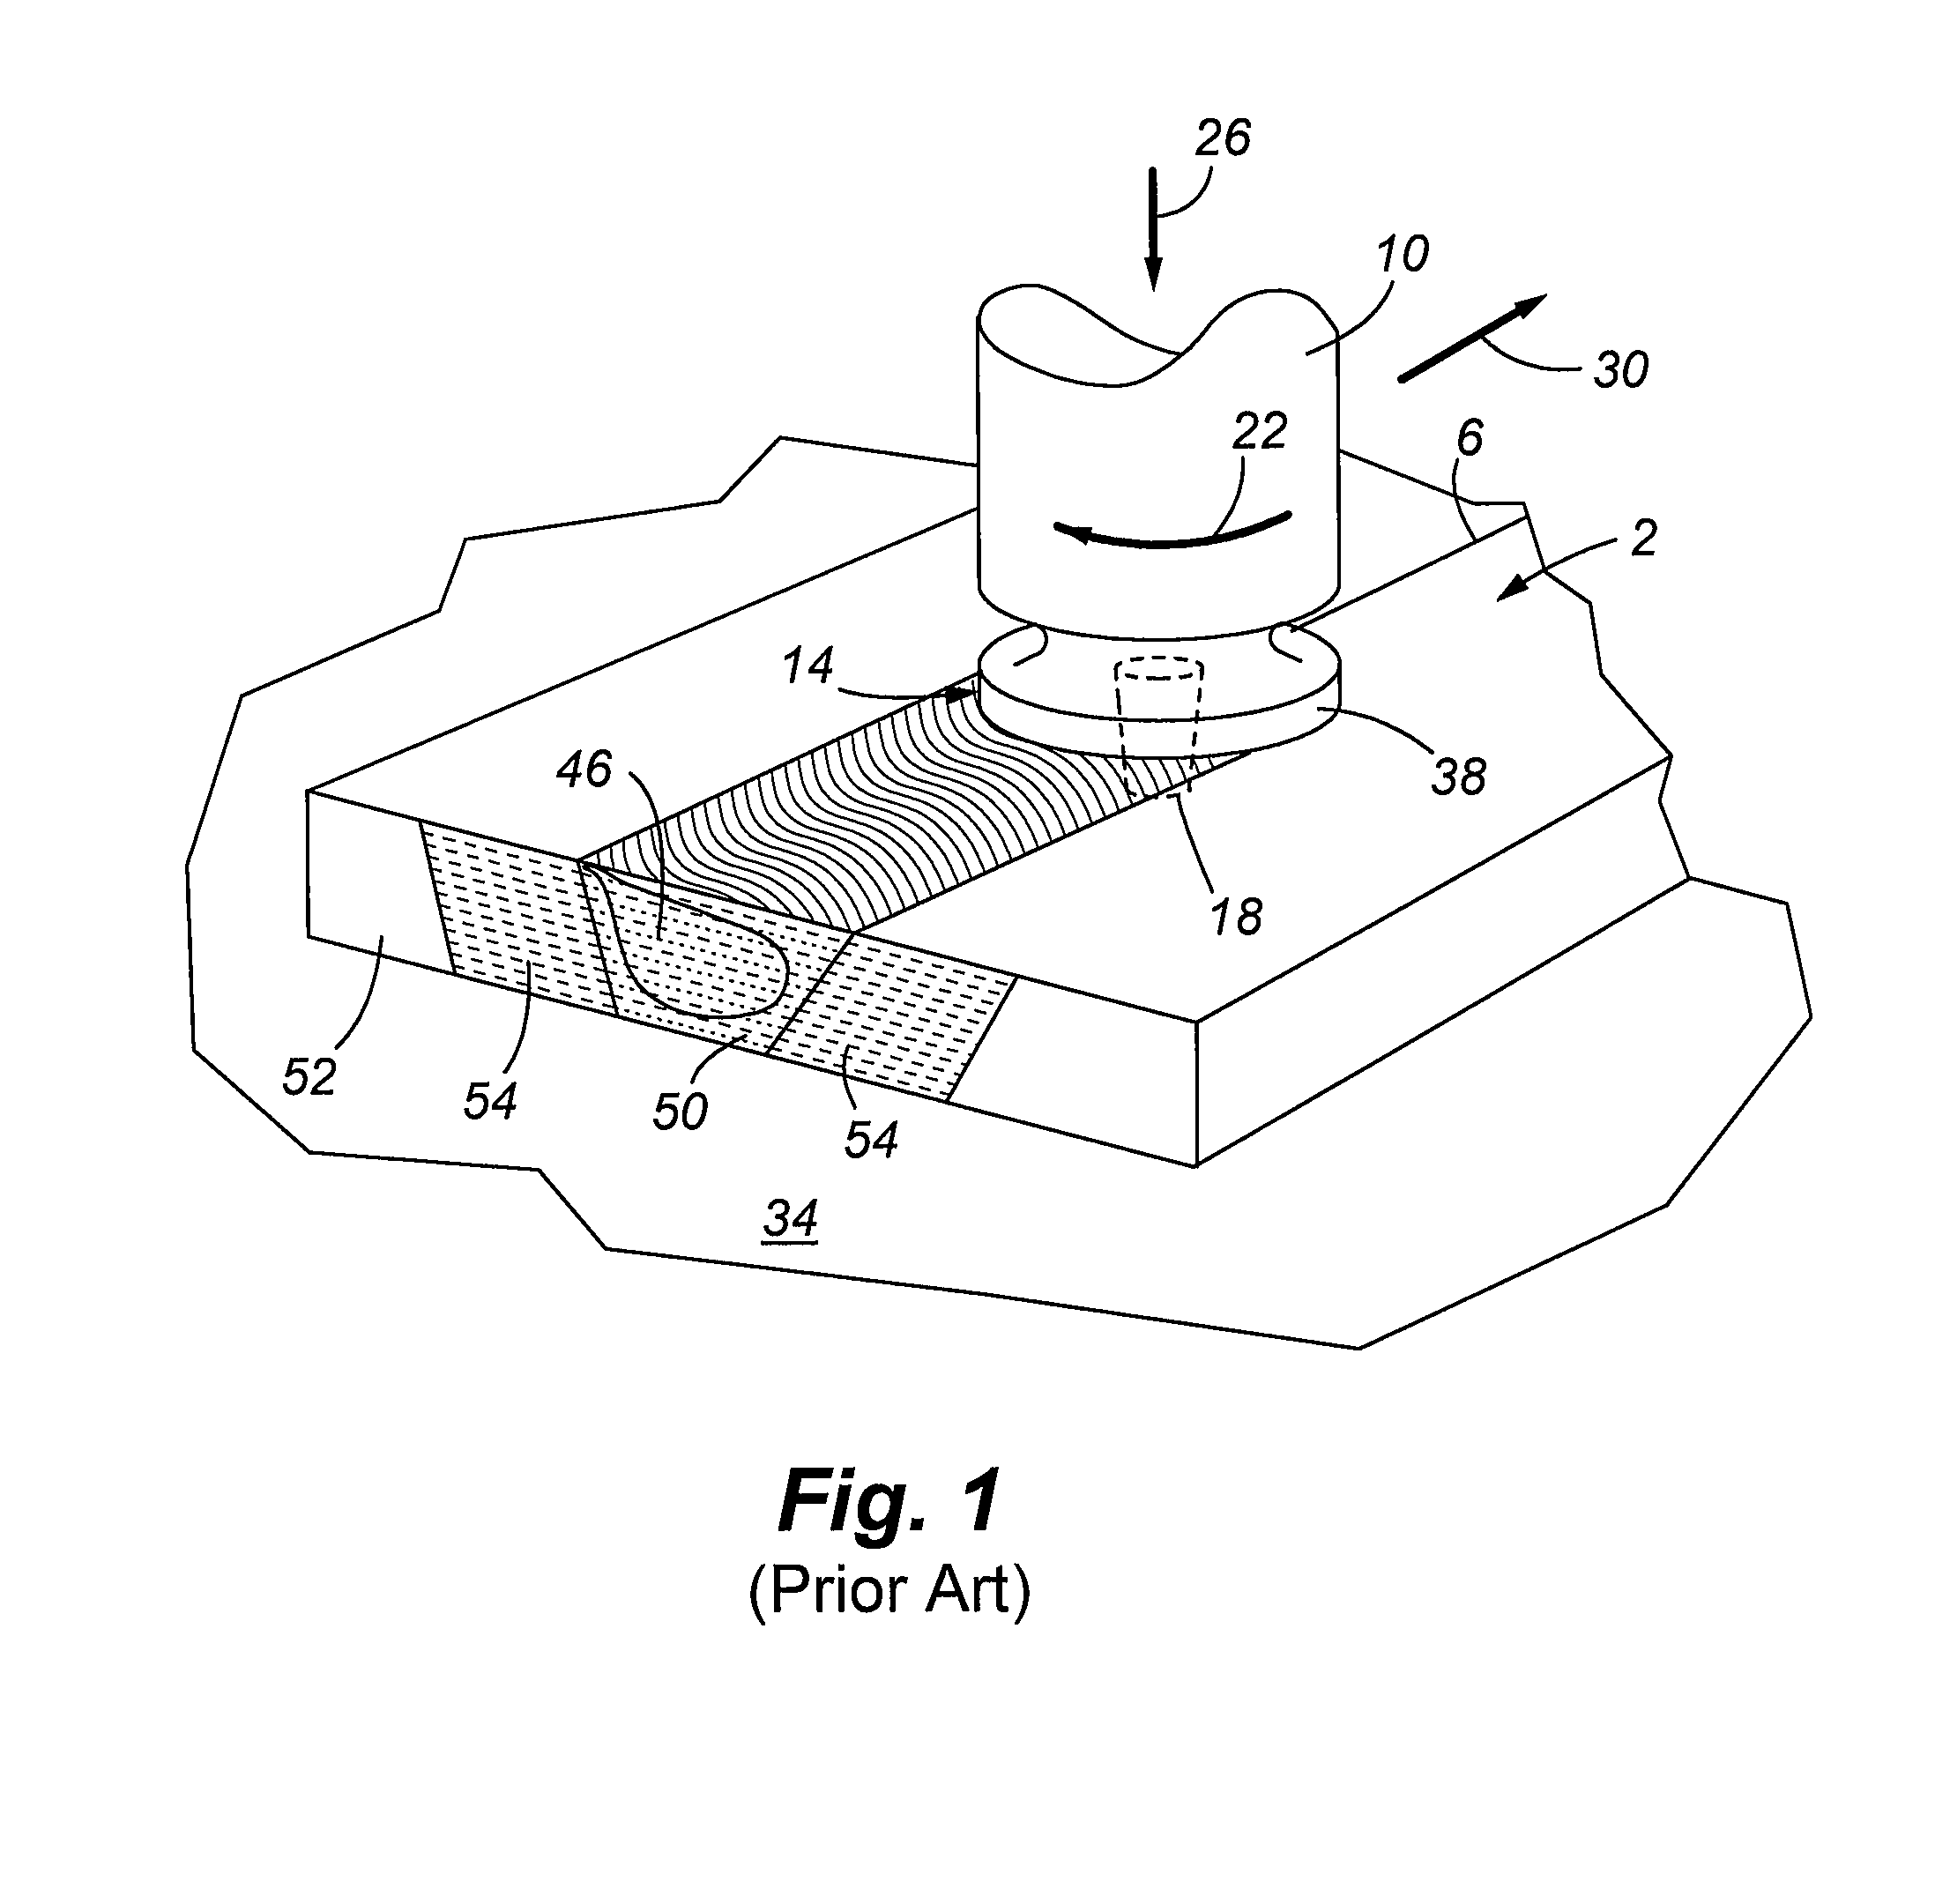 Friction stir welding apparatus, system and method